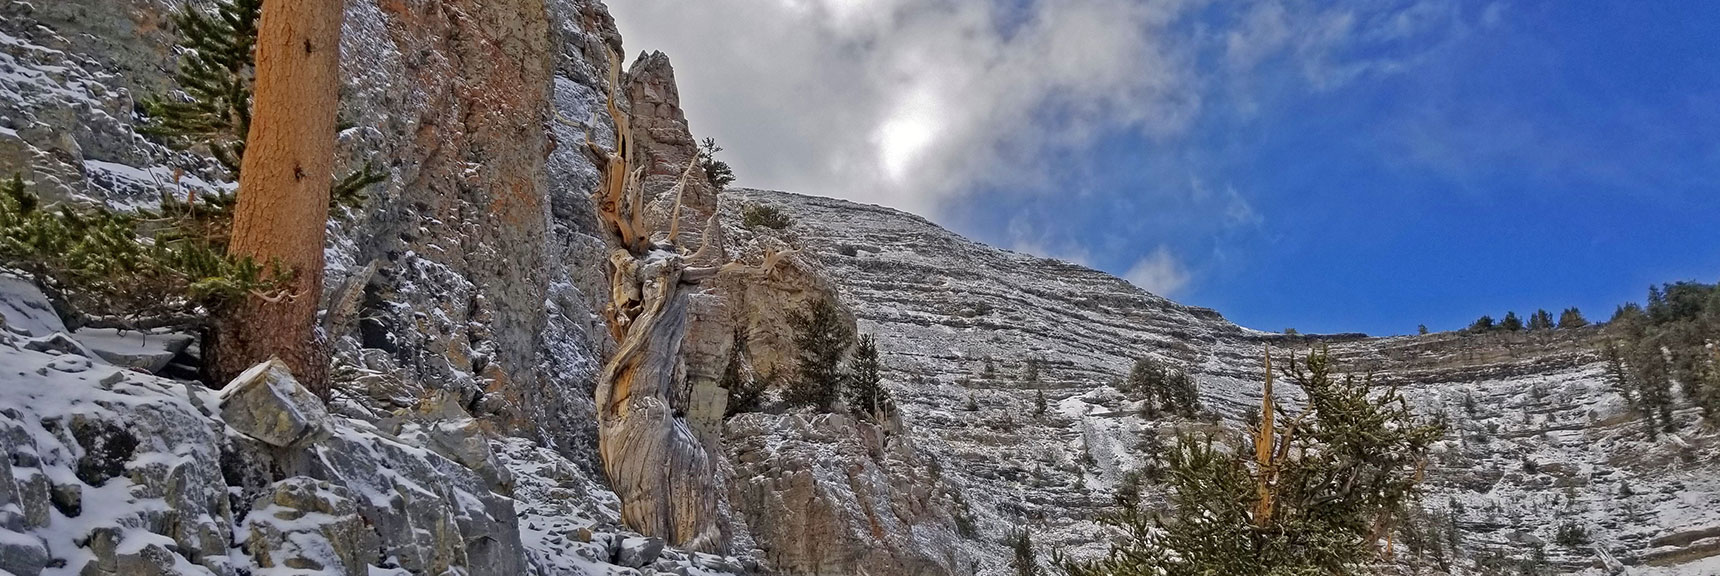 Many Twisted Artistic Bristlecone Pines on This Stretch | Charleston Peak Loop October Snow Dusting | Mt. Charleston Wilderness | Spring Mountains, Nevada